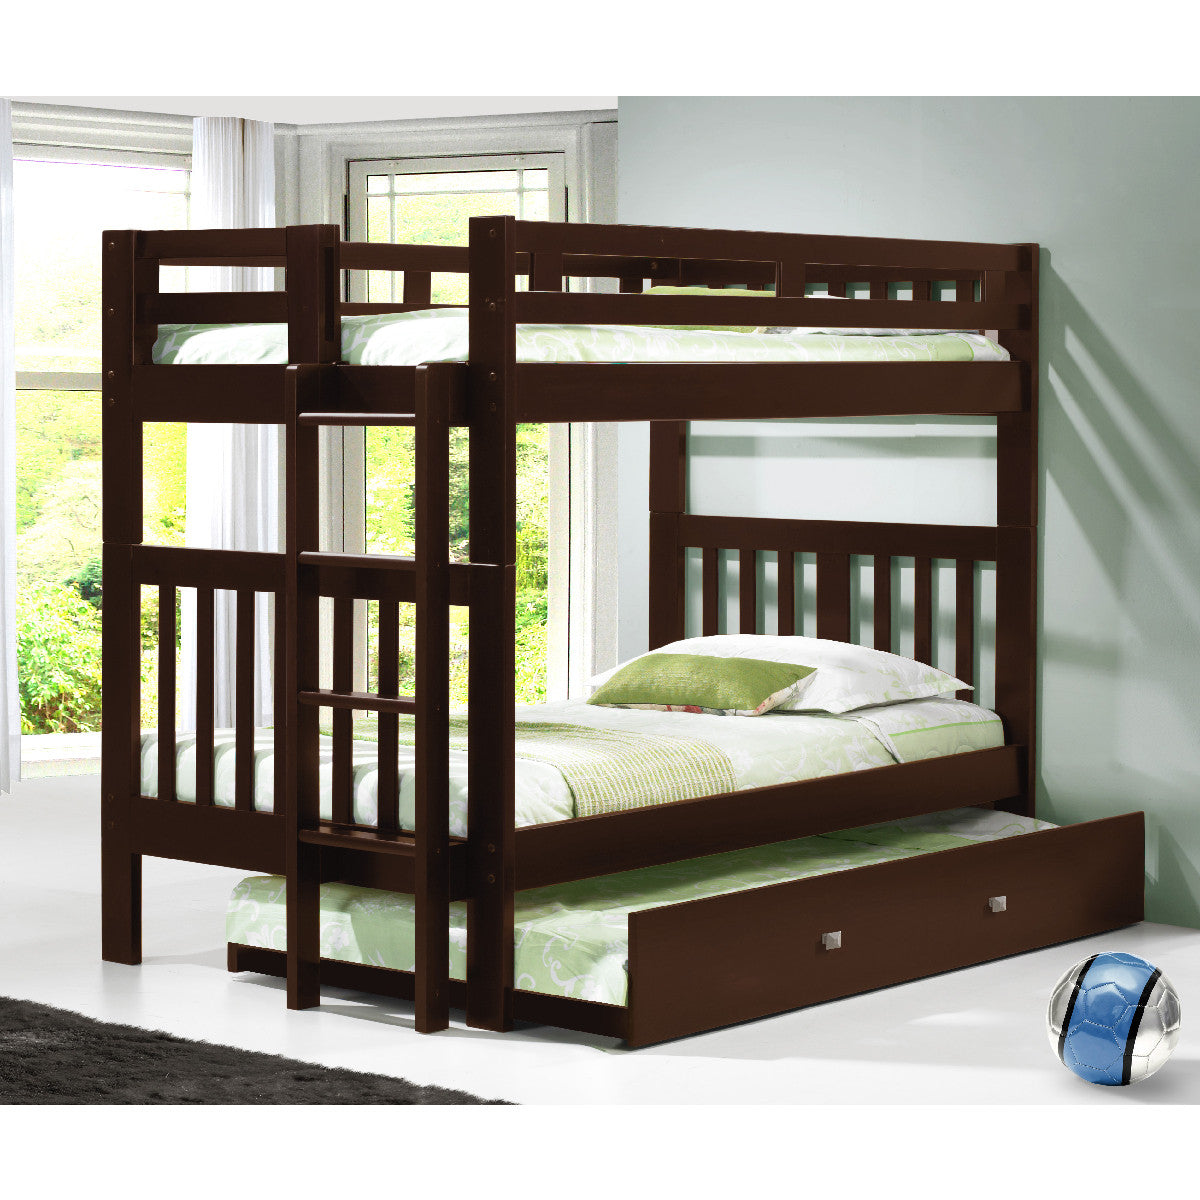 TWIN/TWIN MISSION BUNK BED WITH TRUNDLE BED DARK CAPPUCCINO FINISH